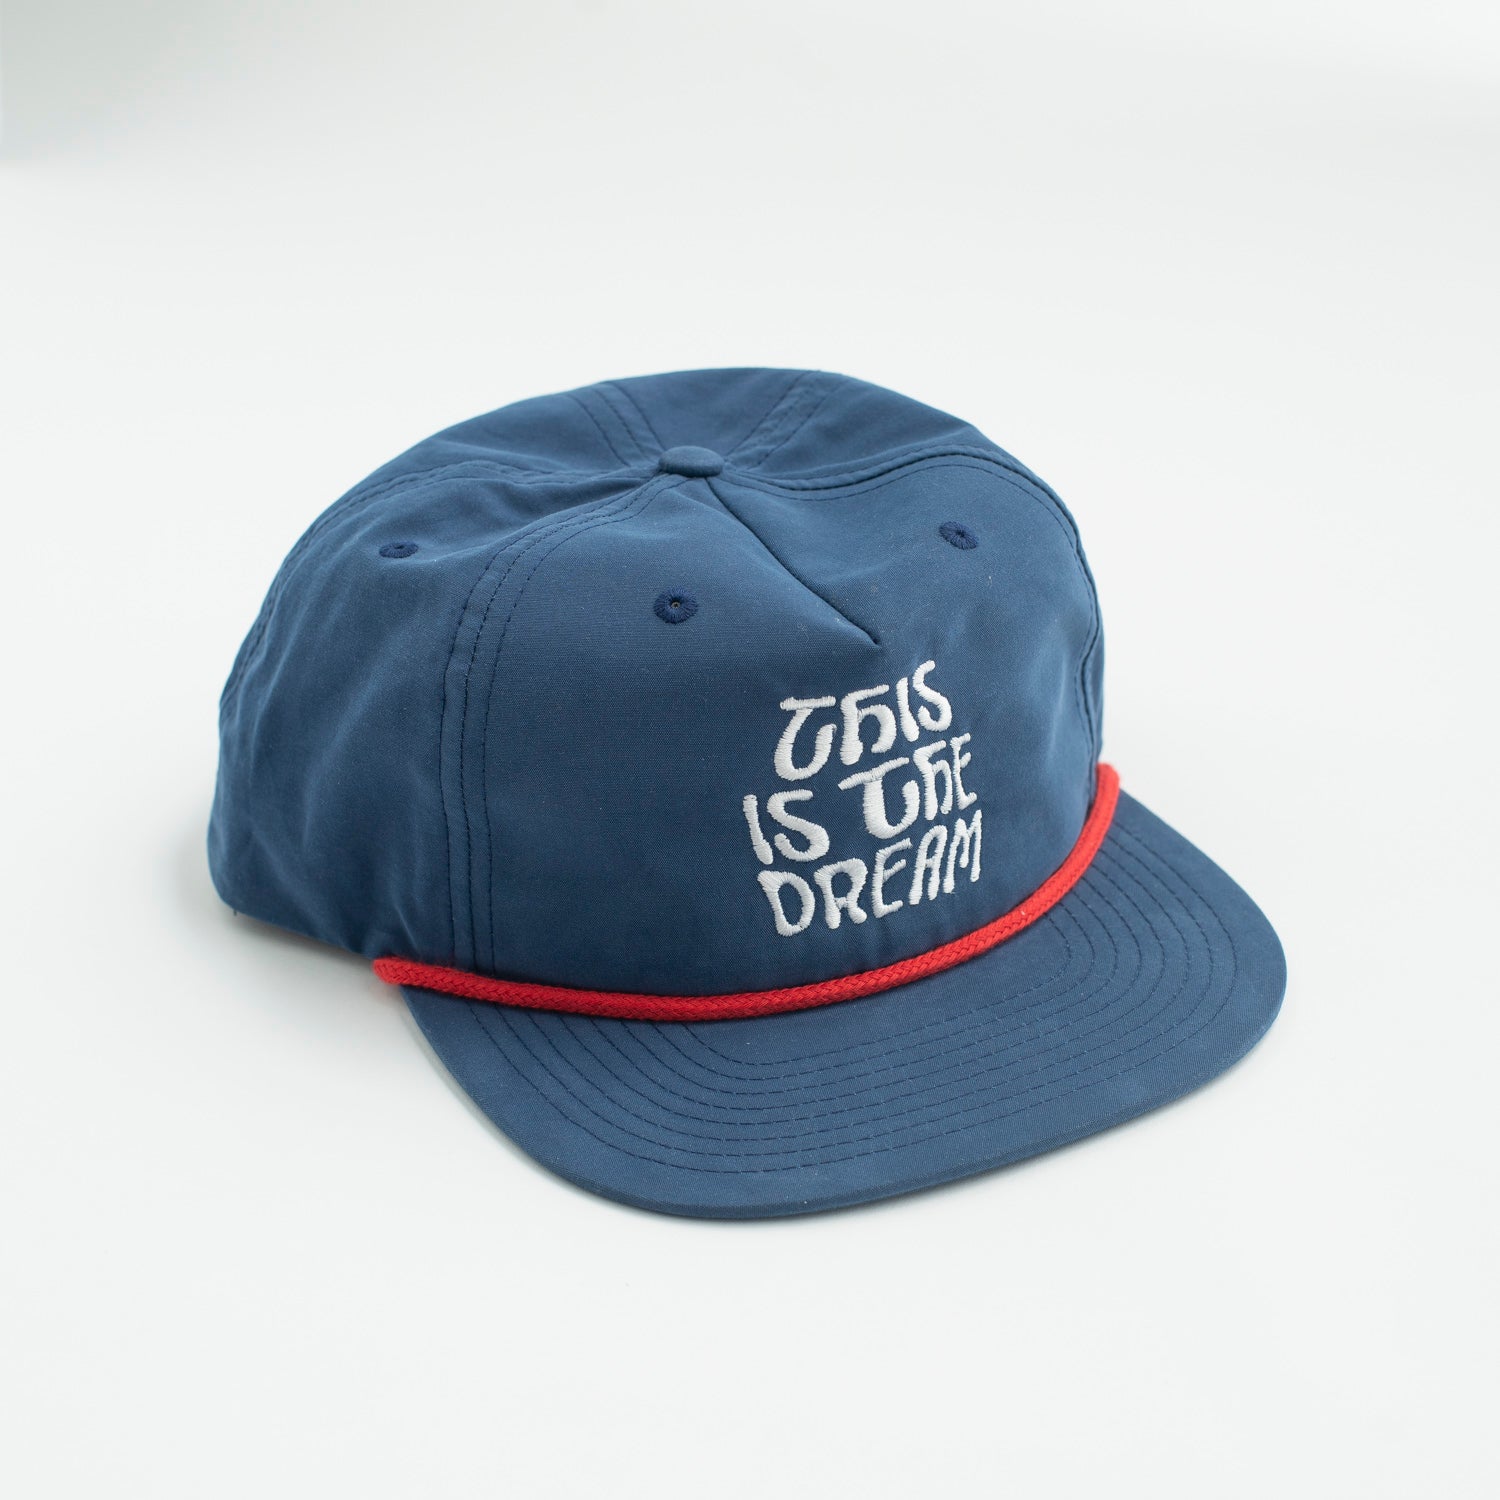 'This is the dream' Snapback Hat